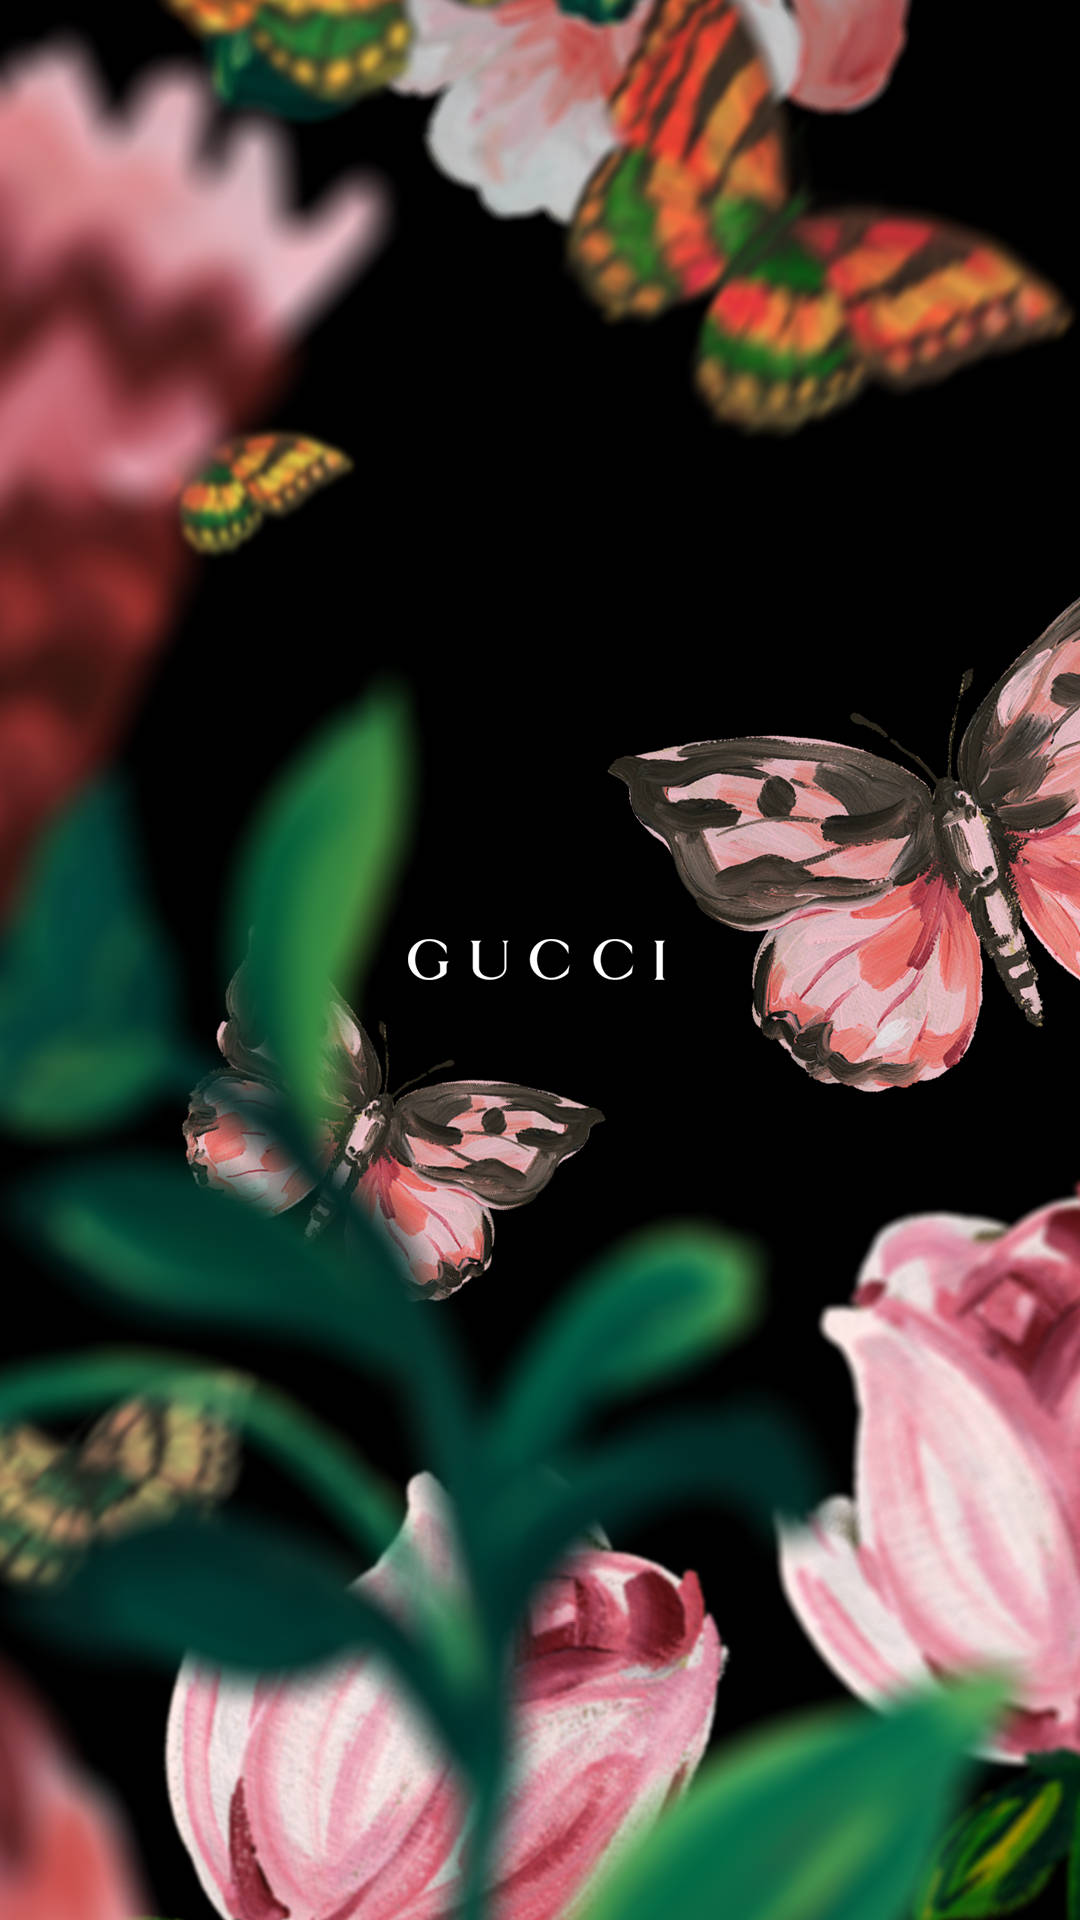 Butterfly Gucci Iphone Background